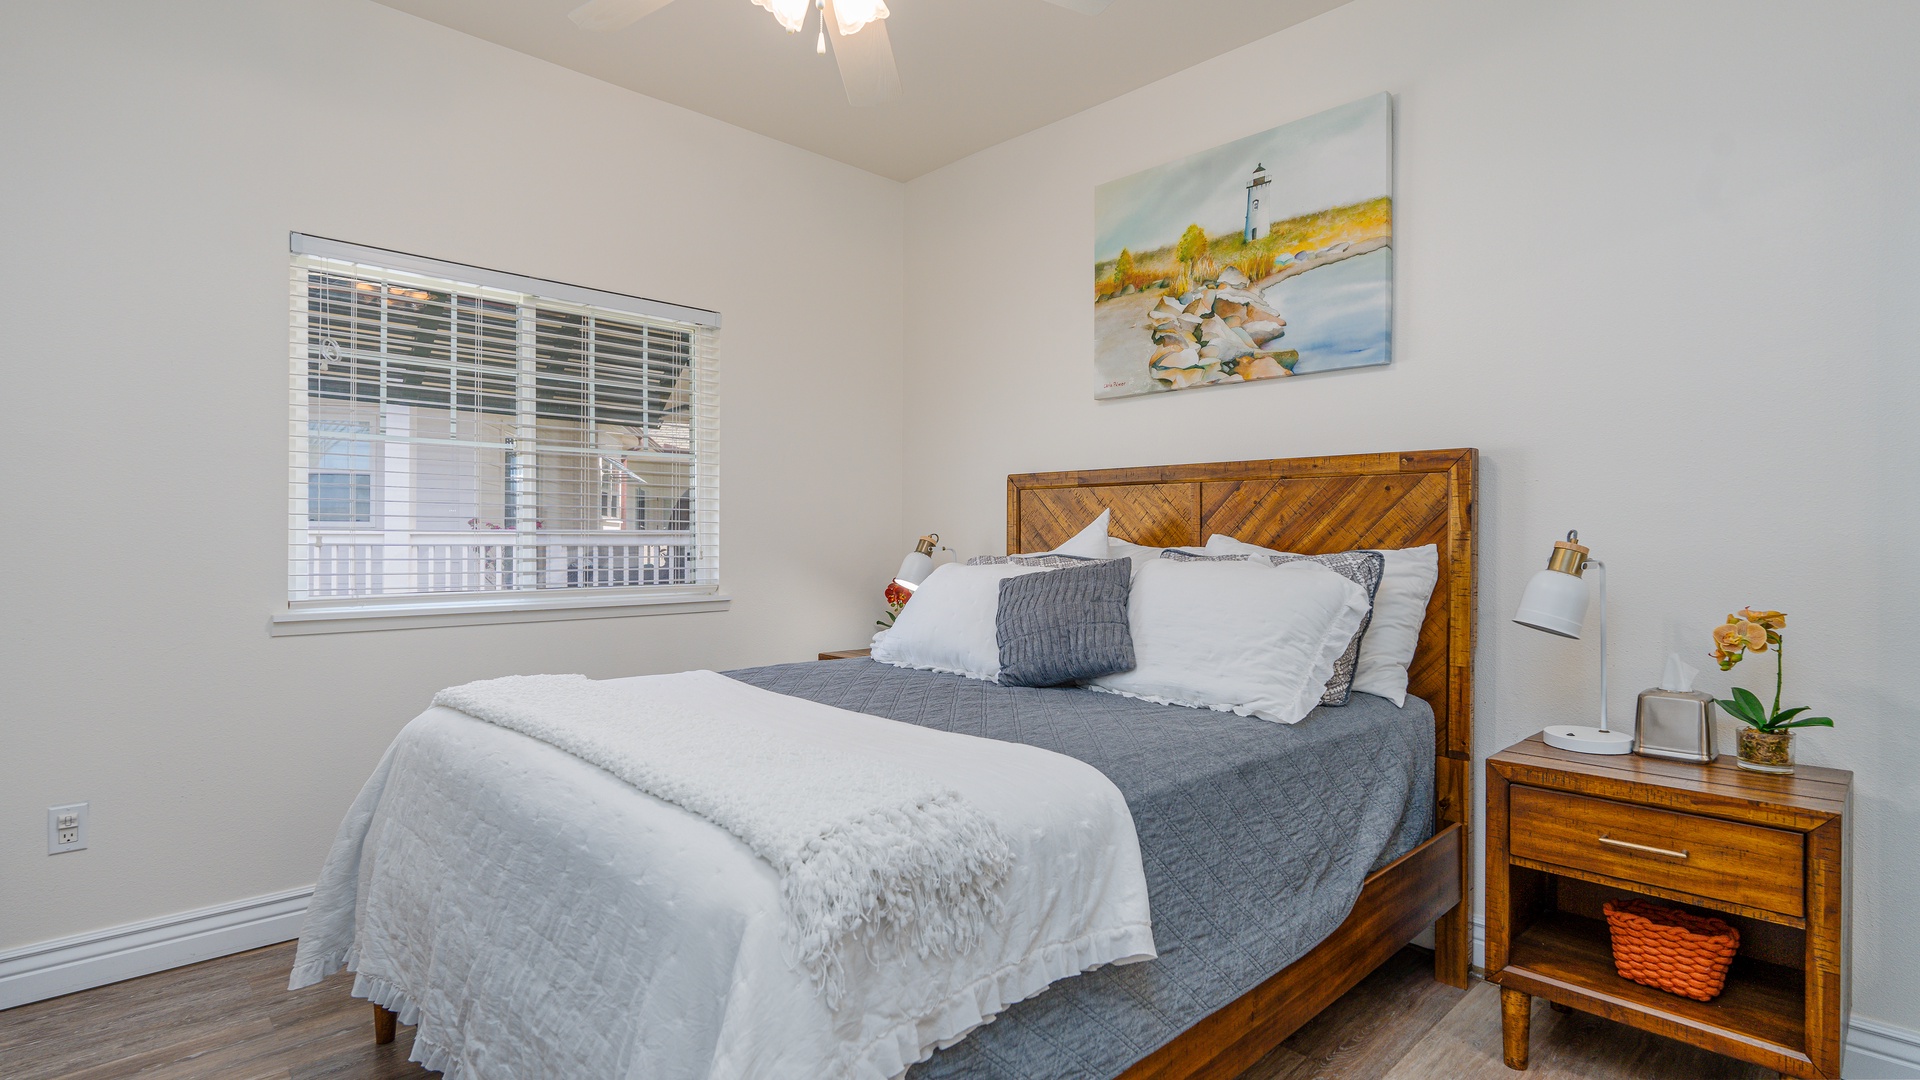 Kapolei Vacation Rentals, Coconut Plantation 1078-1 - The second guest bedroom also has a ceiling fan.